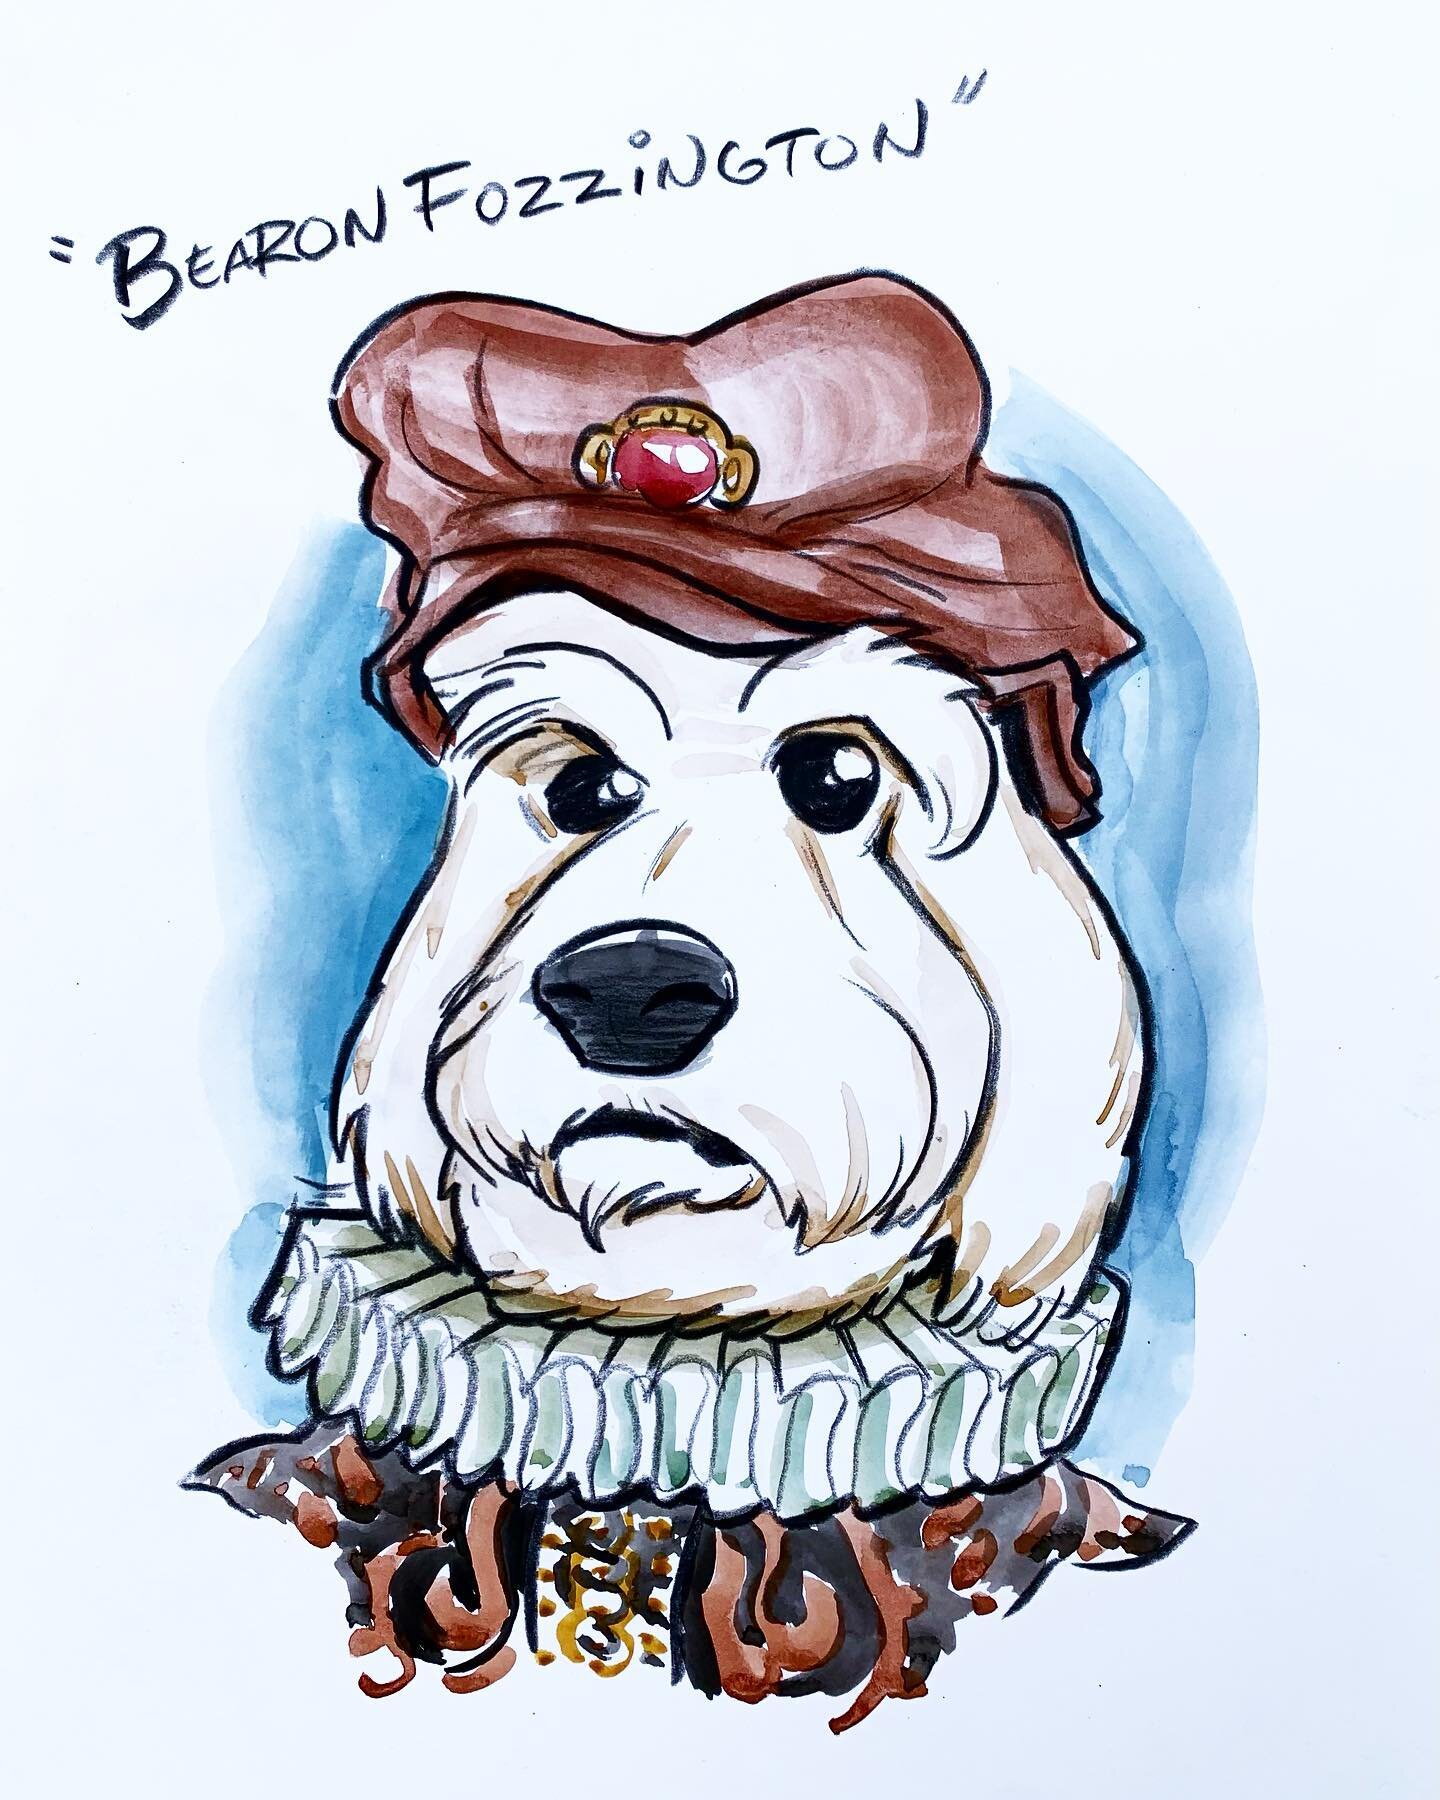 Cartoony Pet Portraits!  This is Fozzy... https://cartoonyportraits.com

@l.a.fozziebear #petportraitsofinstagram #petportraits #caricatures #commissionsopen #fundrawing #zoomparty #watercolorillustration #funnydrawing #illustrationsketch #partyideas